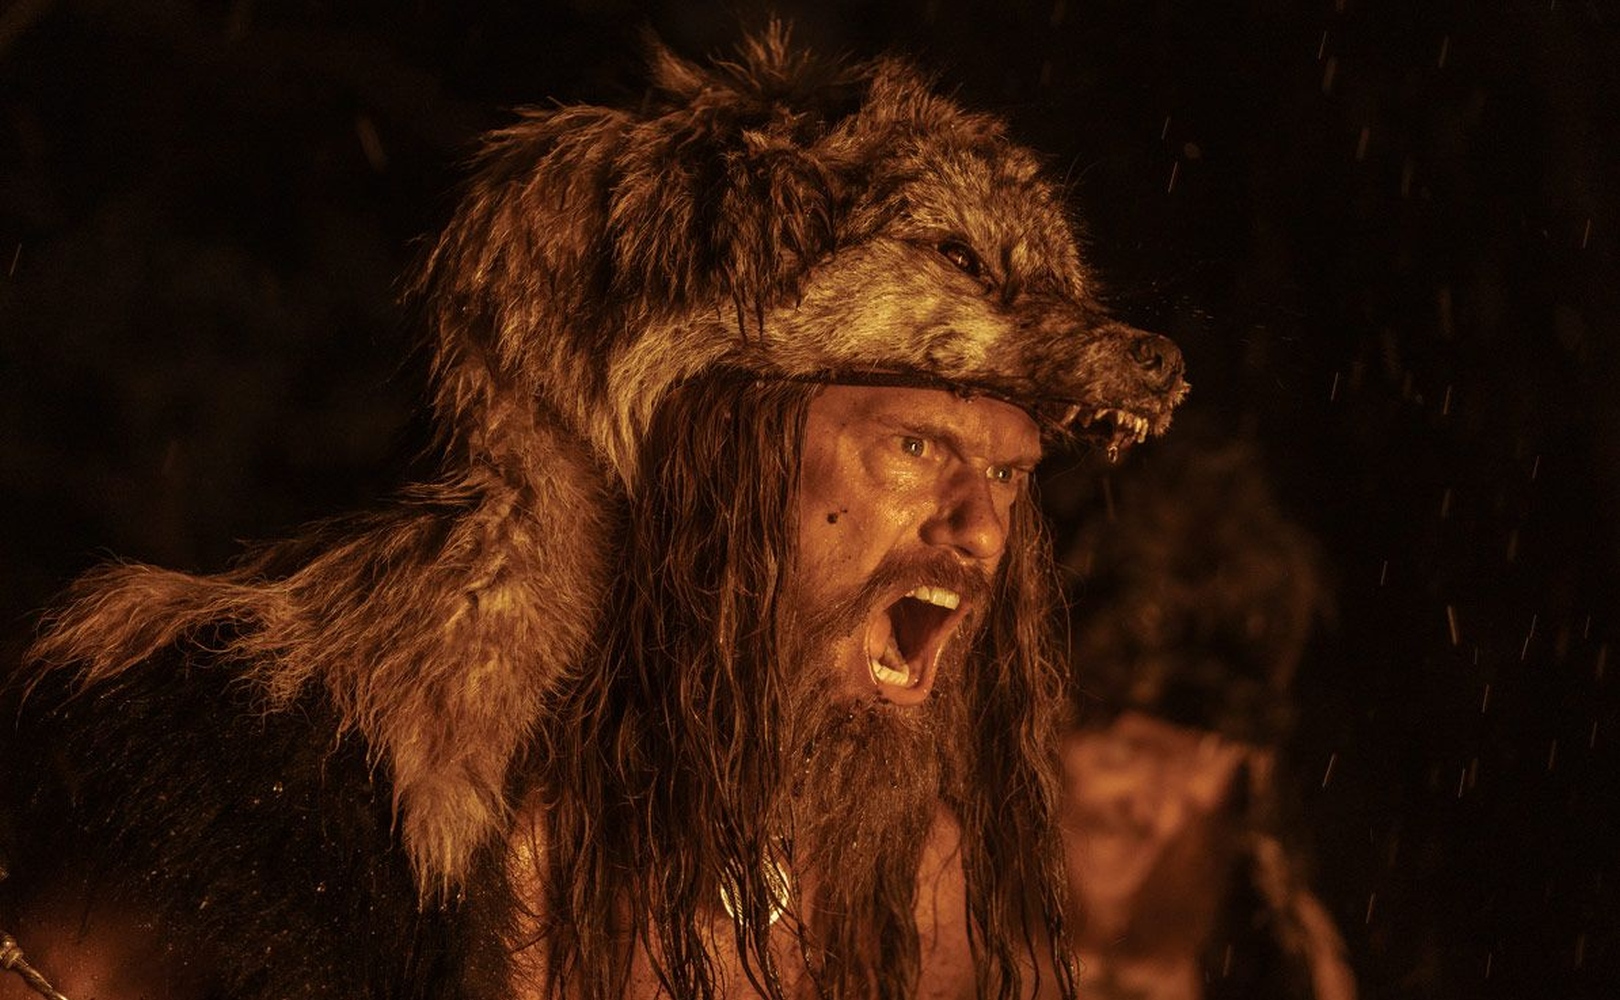 The Northman: The second official trailer for the movie